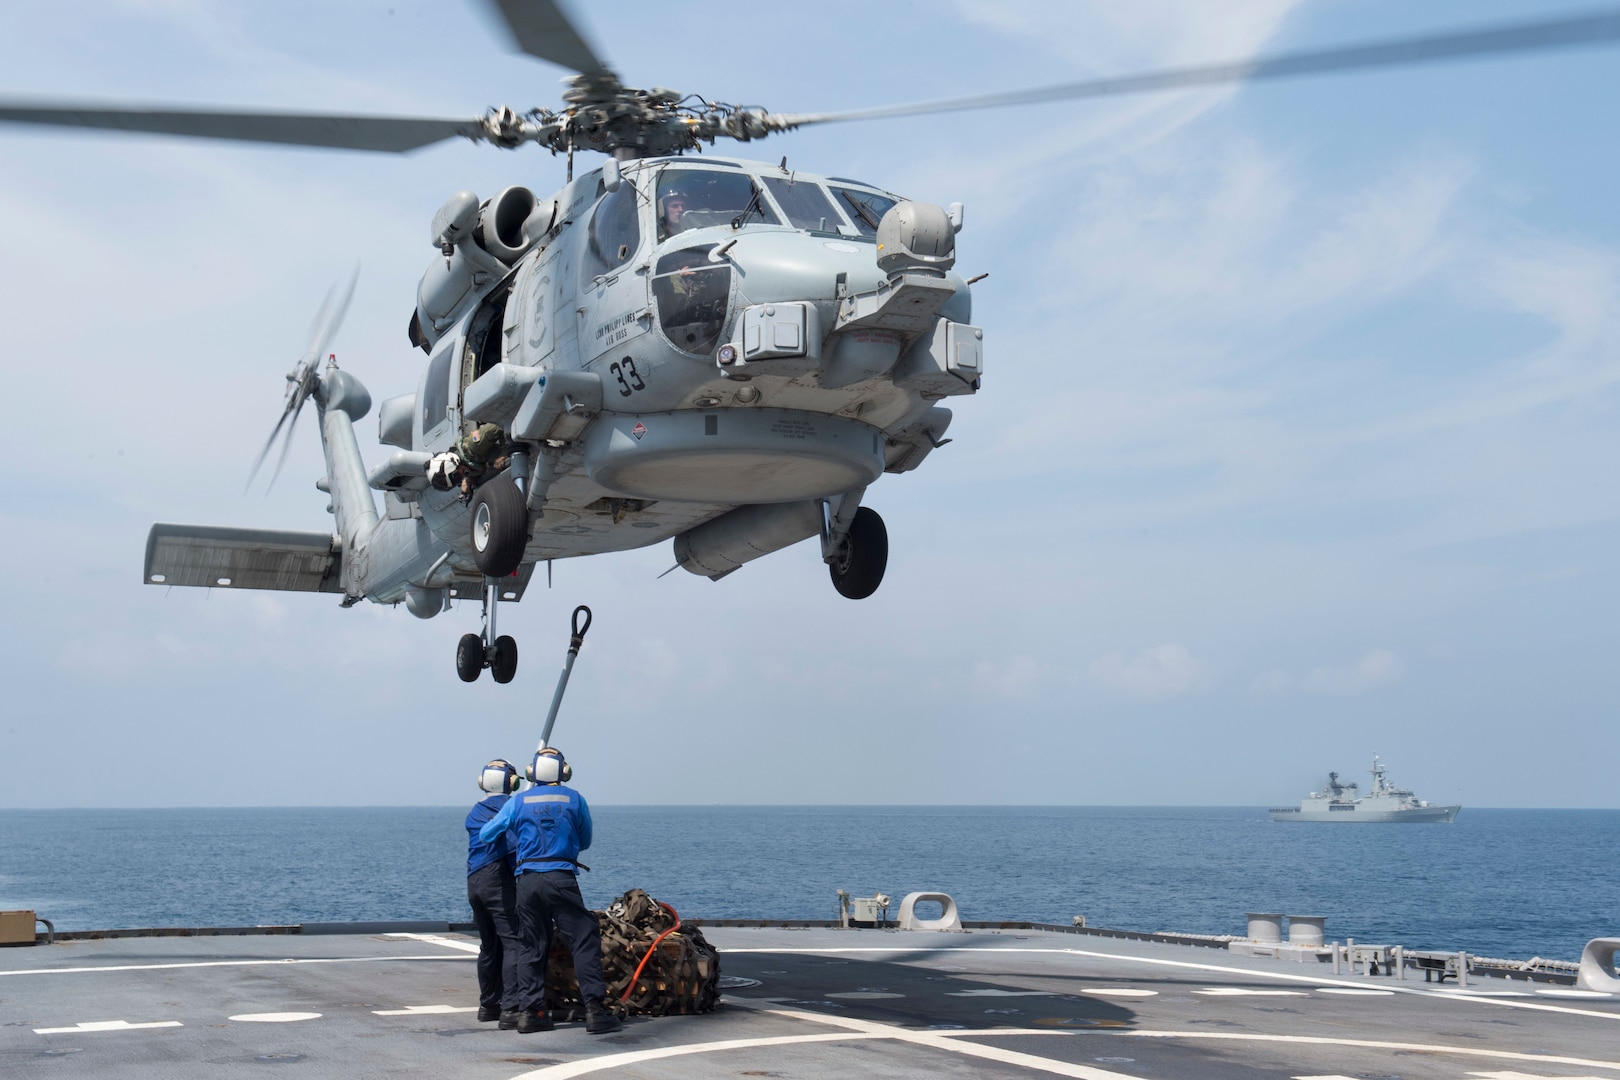 151001-N-MK881-655
BAY OF BENGAL (October 1, 2015) Sailors assigned to the littoral combat ship USS Fort Worth (LCS 3) attach a load during a vertical replenishment exercise as part Cooperation Afloat Readiness and Training (CARAT) Bangladesh 2015. CARAT is an annual, bilateral exercise series with the U.S. Navy, U.S. Marine Corps and the armed forces of nine partner nations. (U.S. Navy photo by Mass Communication Specialist 2nd Class Joe Bishop/Released)